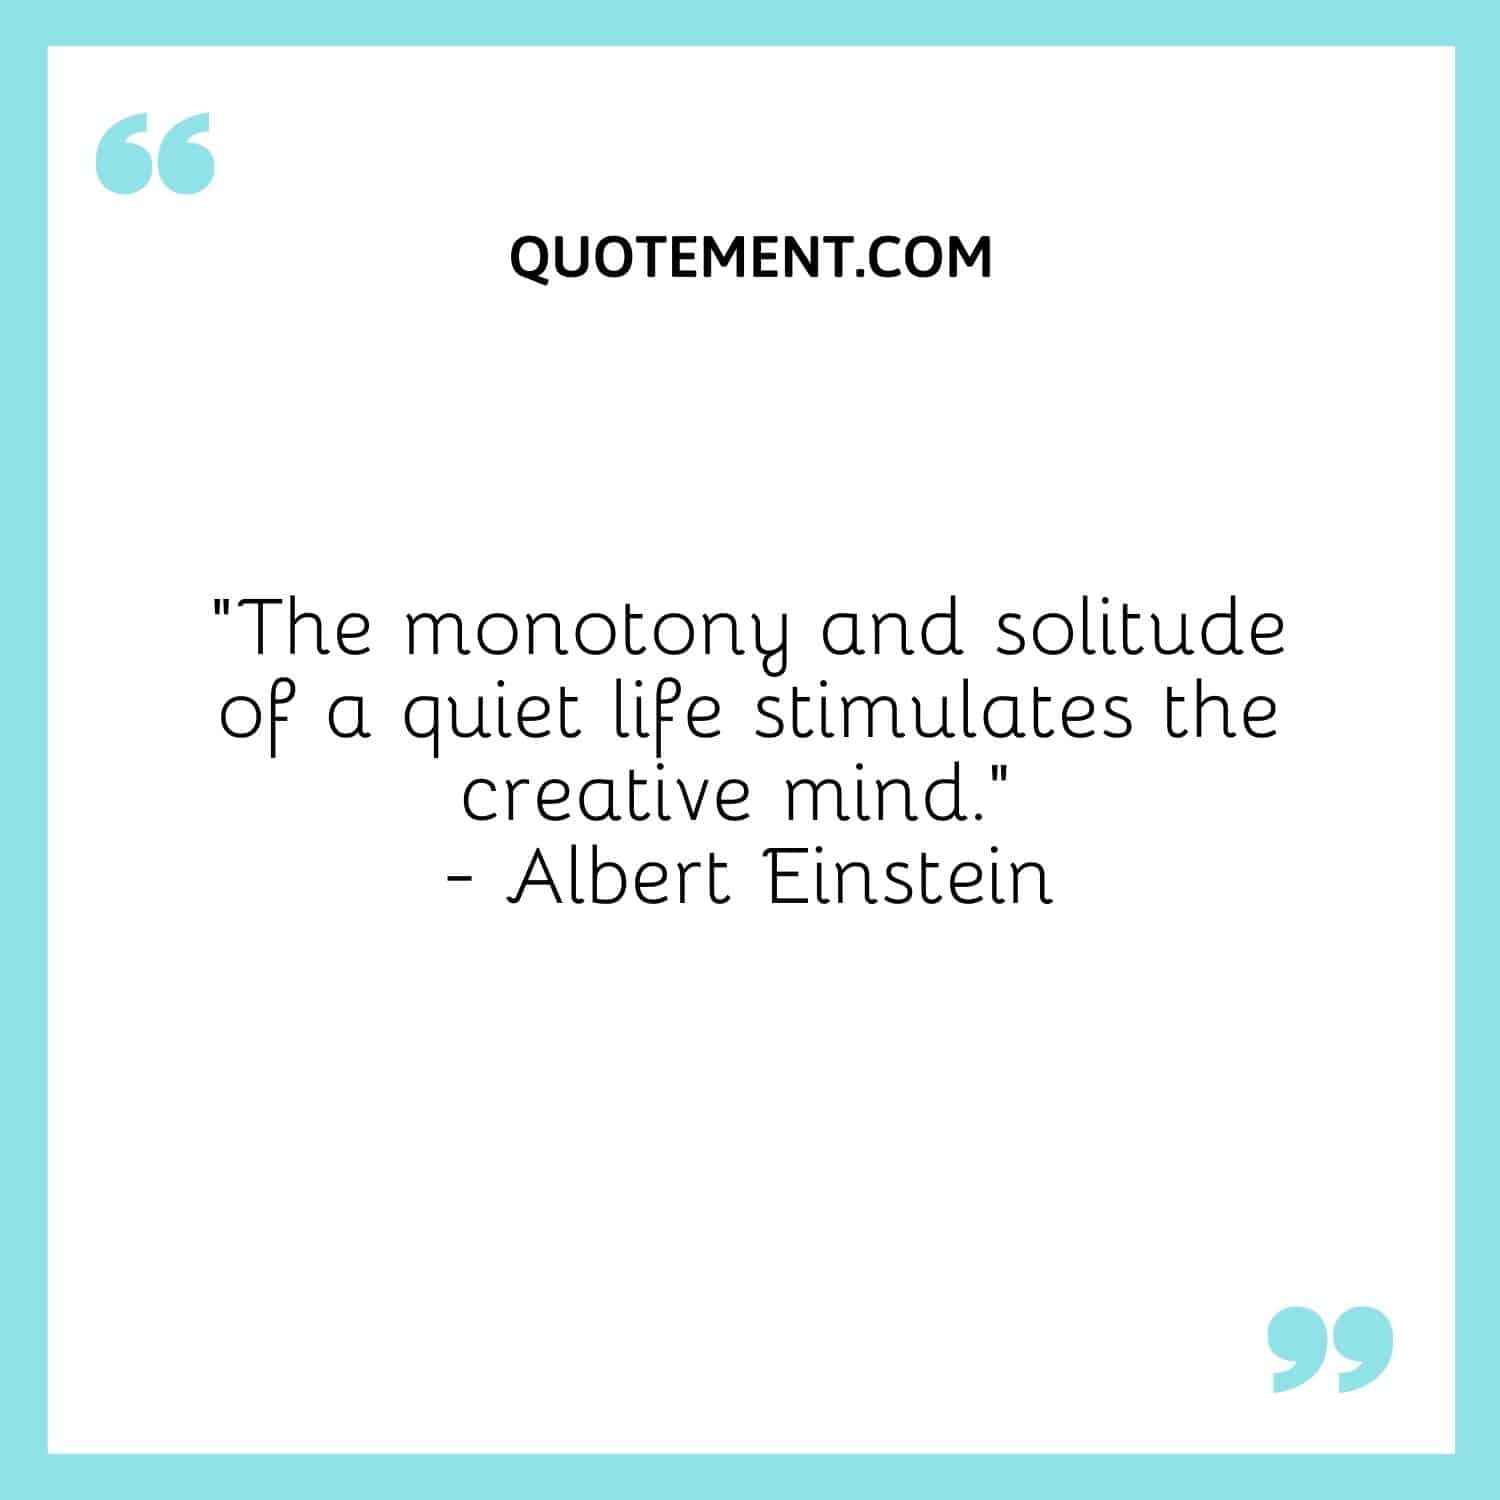 “The monotony and solitude of a quiet life stimulates the creative mind.” — Albert Einstein